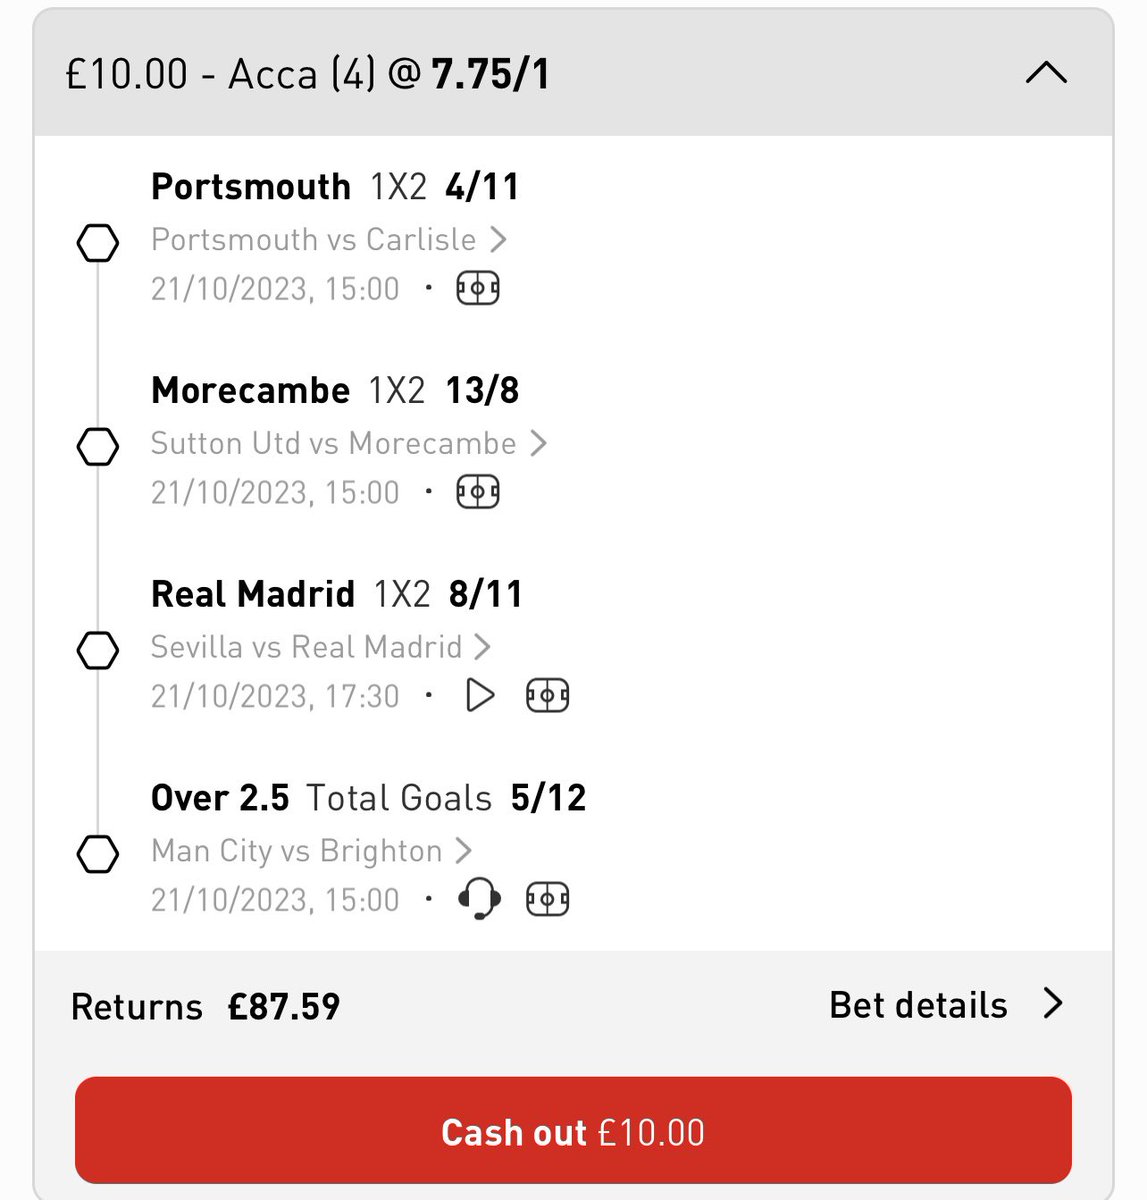 Today’s mixed acca - 7.75/1 🏴󠁧󠁢󠁥󠁮󠁧󠁿 Portsmouth to win 🏴󠁧󠁢󠁥󠁮󠁧󠁿Morecambe to win 🇪🇸Real Madrid to win 🏴󠁧󠁢󠁥󠁮󠁧󠁿Man City V Brighton - over 2.5 goals £10 returns £87.59‼️💸 Sign up to the link below to grab yourself £20 in free bets 👇👇 bit.ly/3ZRhSR6 18+ Play Safe, BeGambleAware.